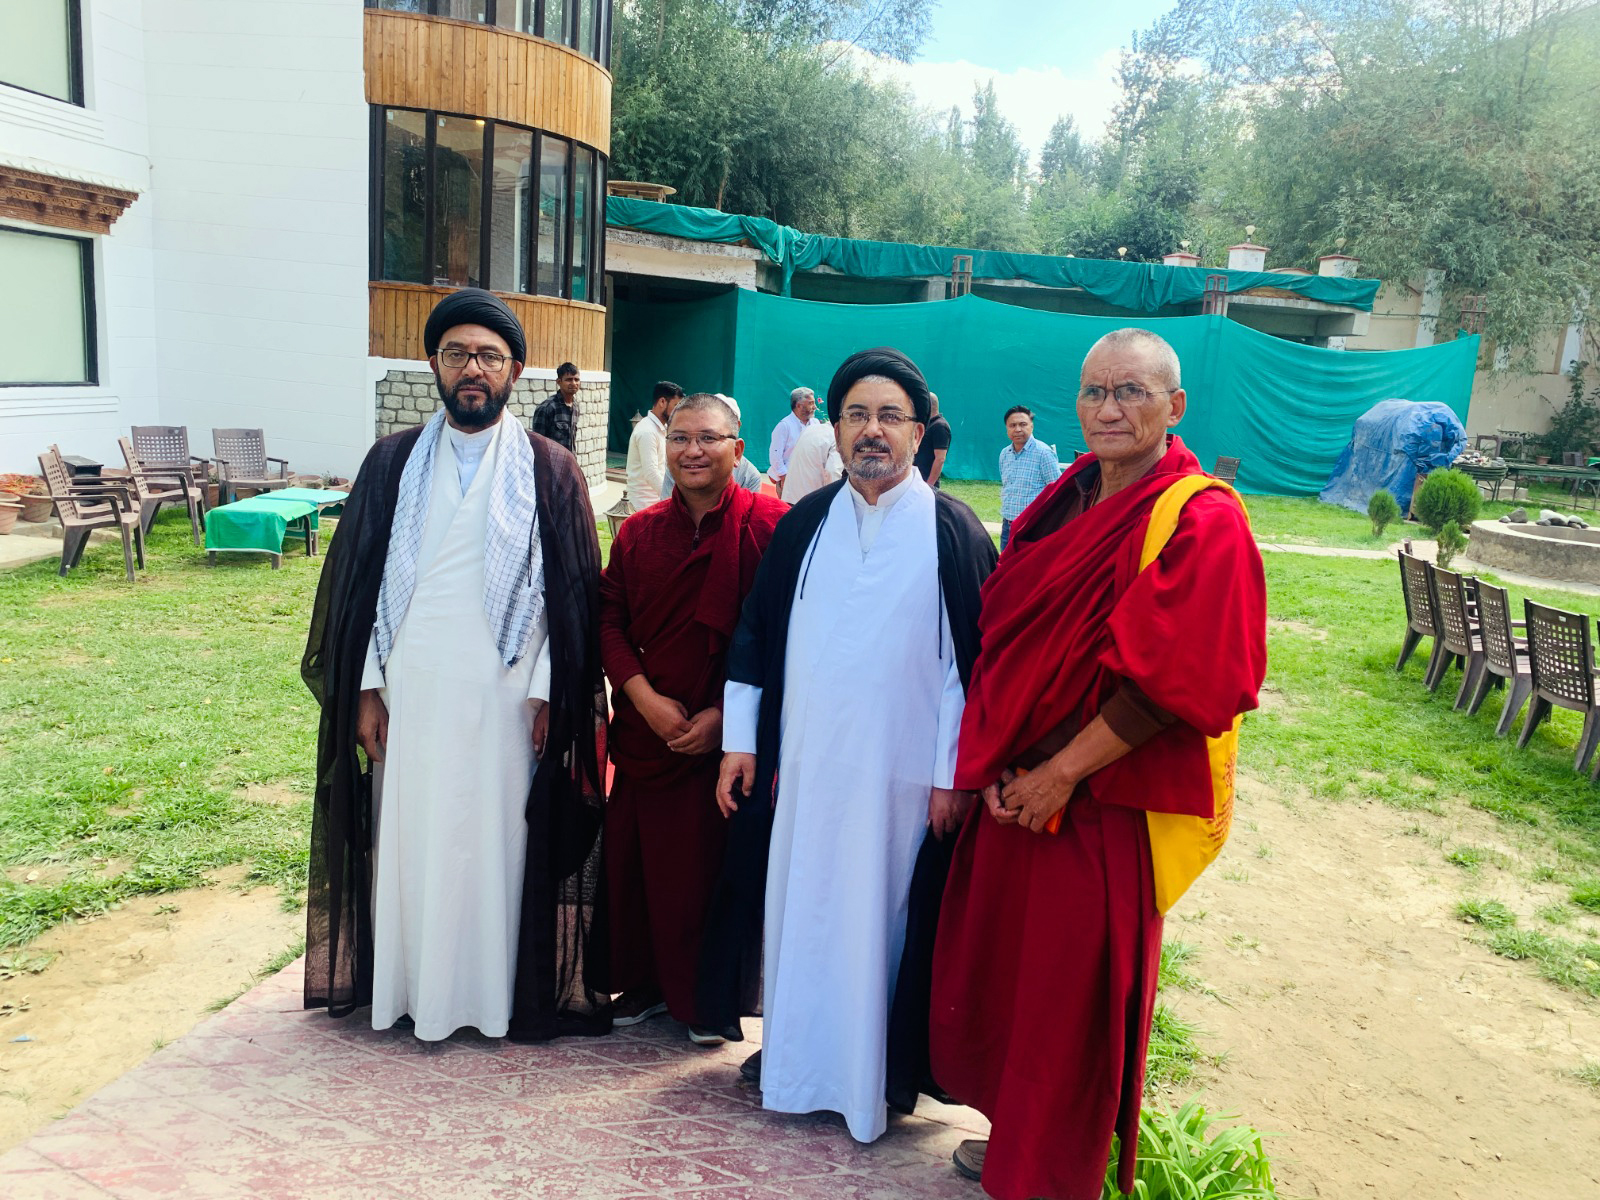 Shiite clerics and Buddhist monks work together to raise their demands for Ladakh Union Territory in Kargil district, India, in June 2022. Photo by Sajjad Hussain Kargili